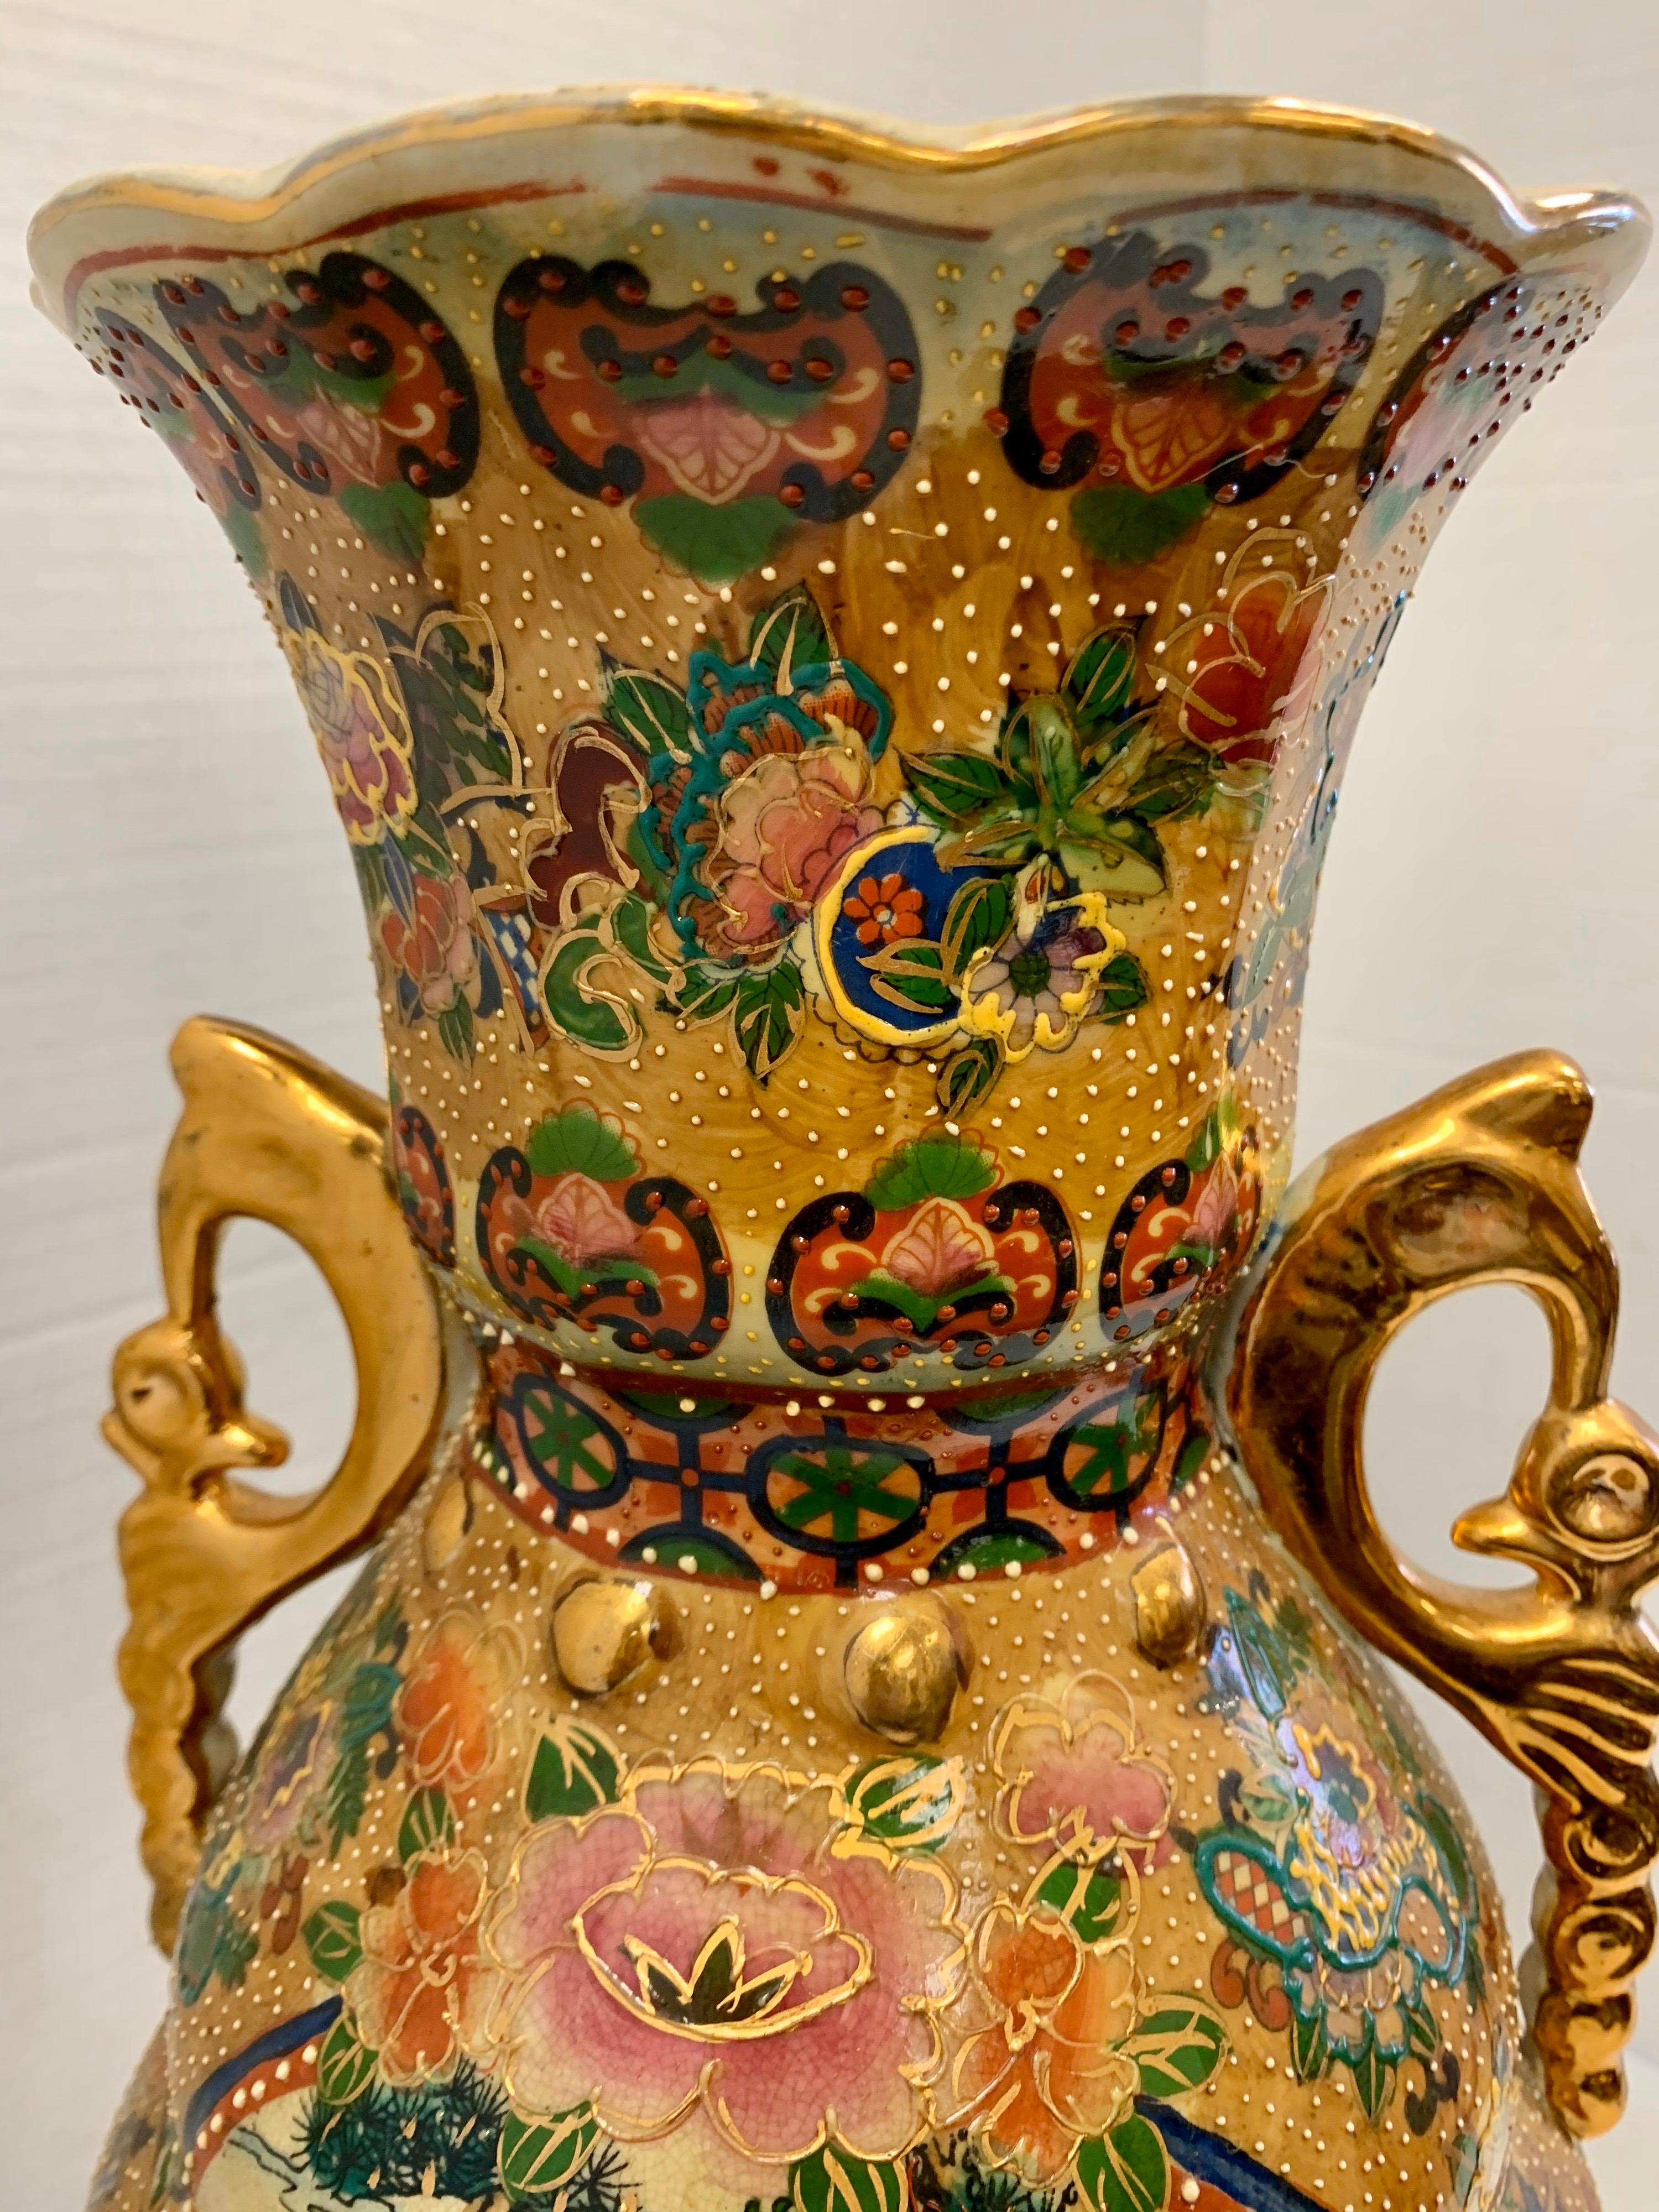 Stunning Japanese porcelain vase wit intricately hand painted scenery of Japanese women. Gorgeous floral detail with raised gold outline adorns the balance of the vase. Handles are a gilt color as well and lastly there are four foo dog heads at